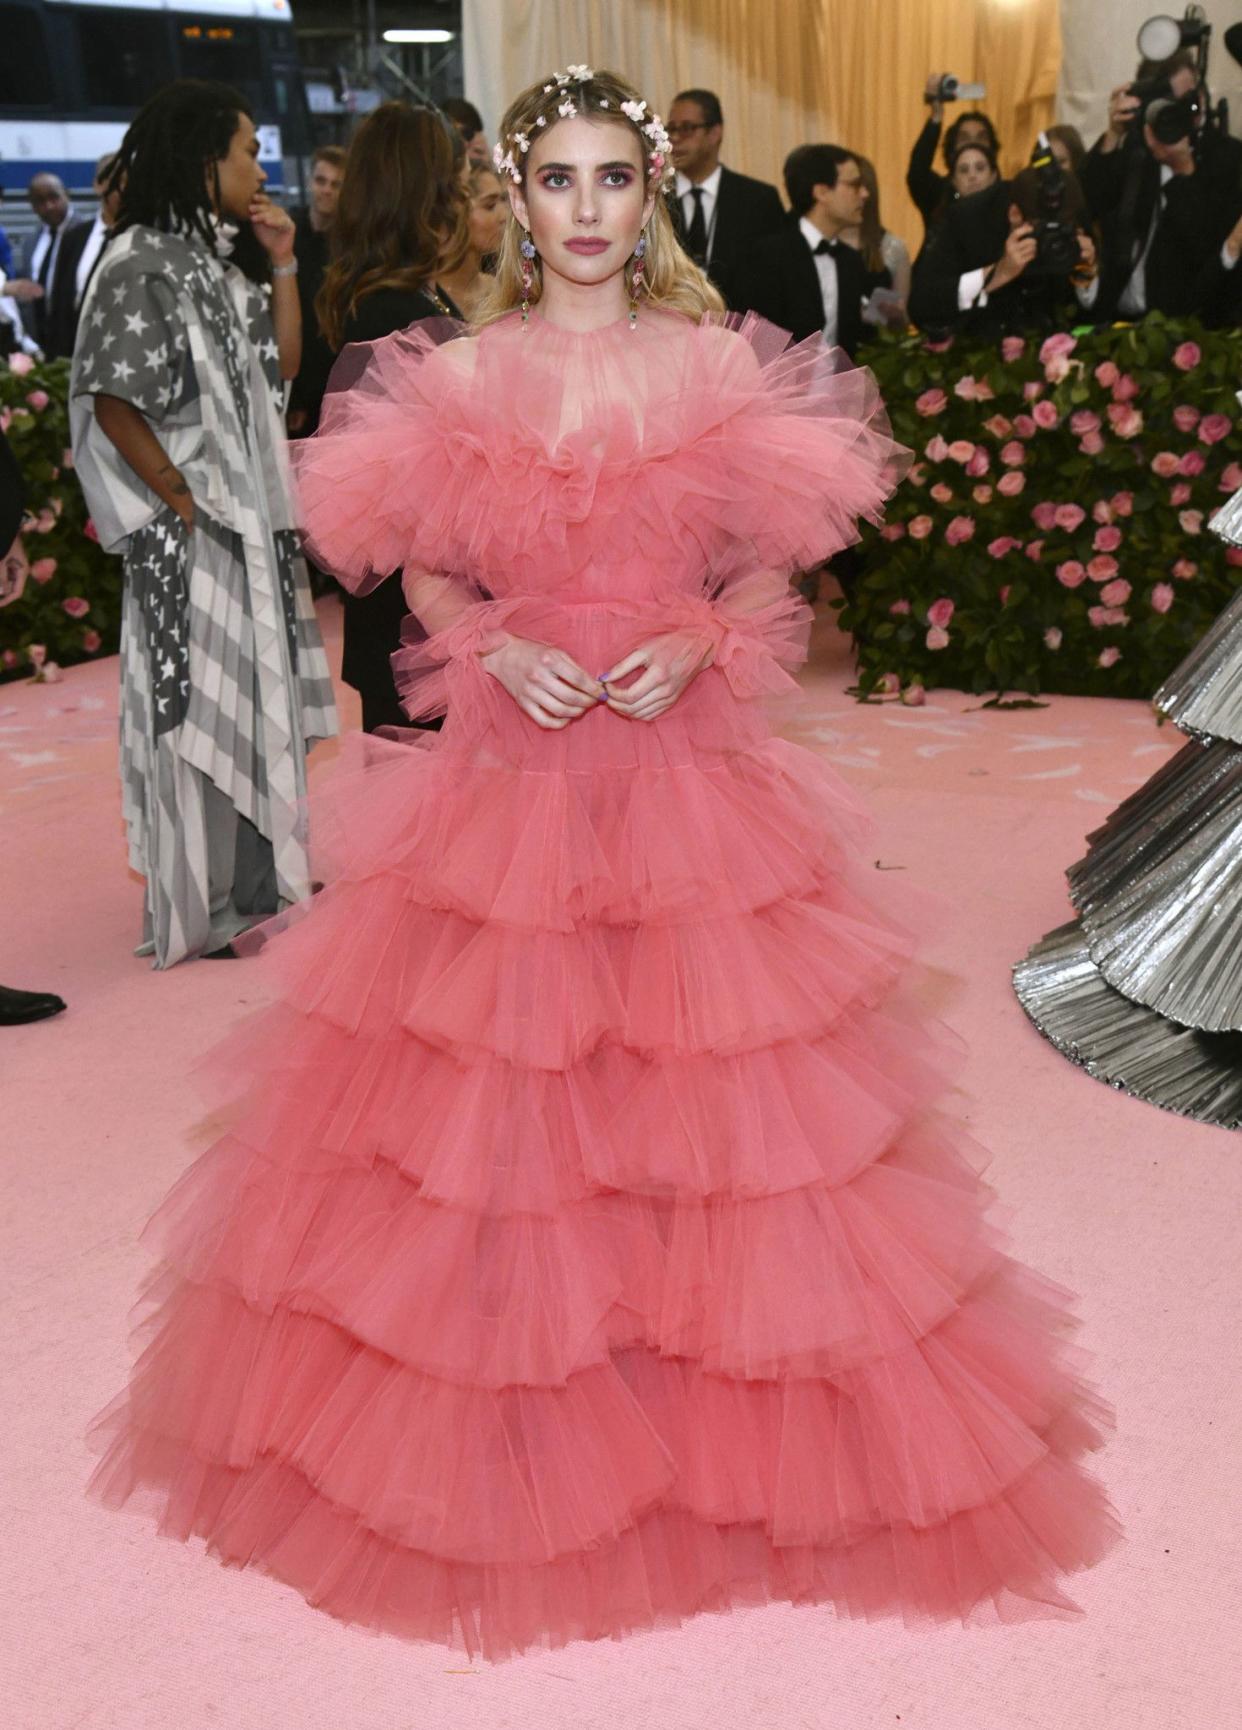 Emma Roberts attends The Metropolitan Museum of Art's Costume Institute benefit gala celebrating the opening of the "Camp: Notes on Fashion" exhibition on Monday, May 6, 2019, in New York.